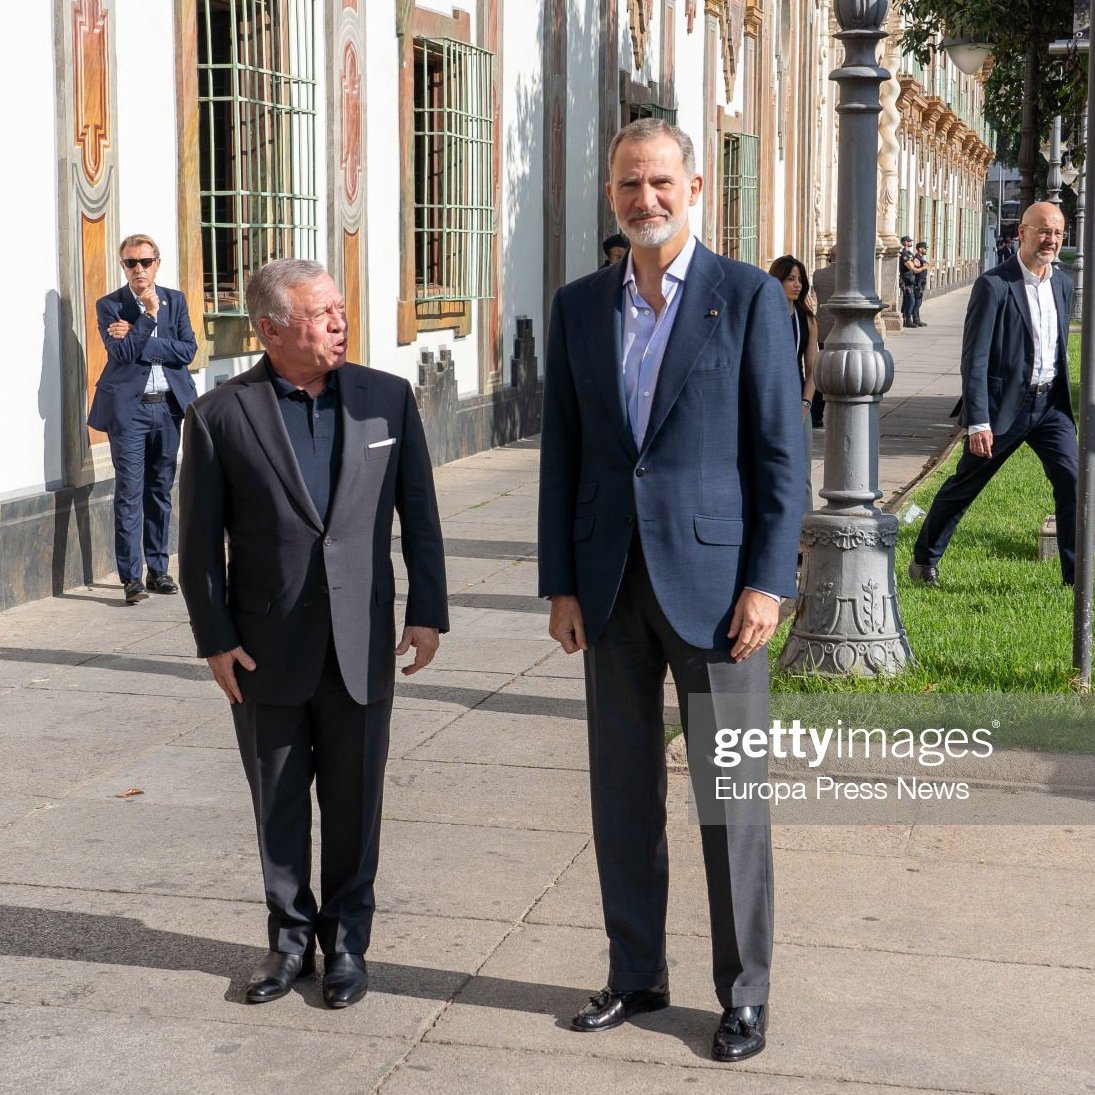 Can't help thinking this looks like a meeting between a diminutive William Shatner and (an extruded) @TheSimonEvans [From the @dieworkwear thread on Tristan Tate's $20k suit. Btw bloke on the right is King Felipe VI of Spain]